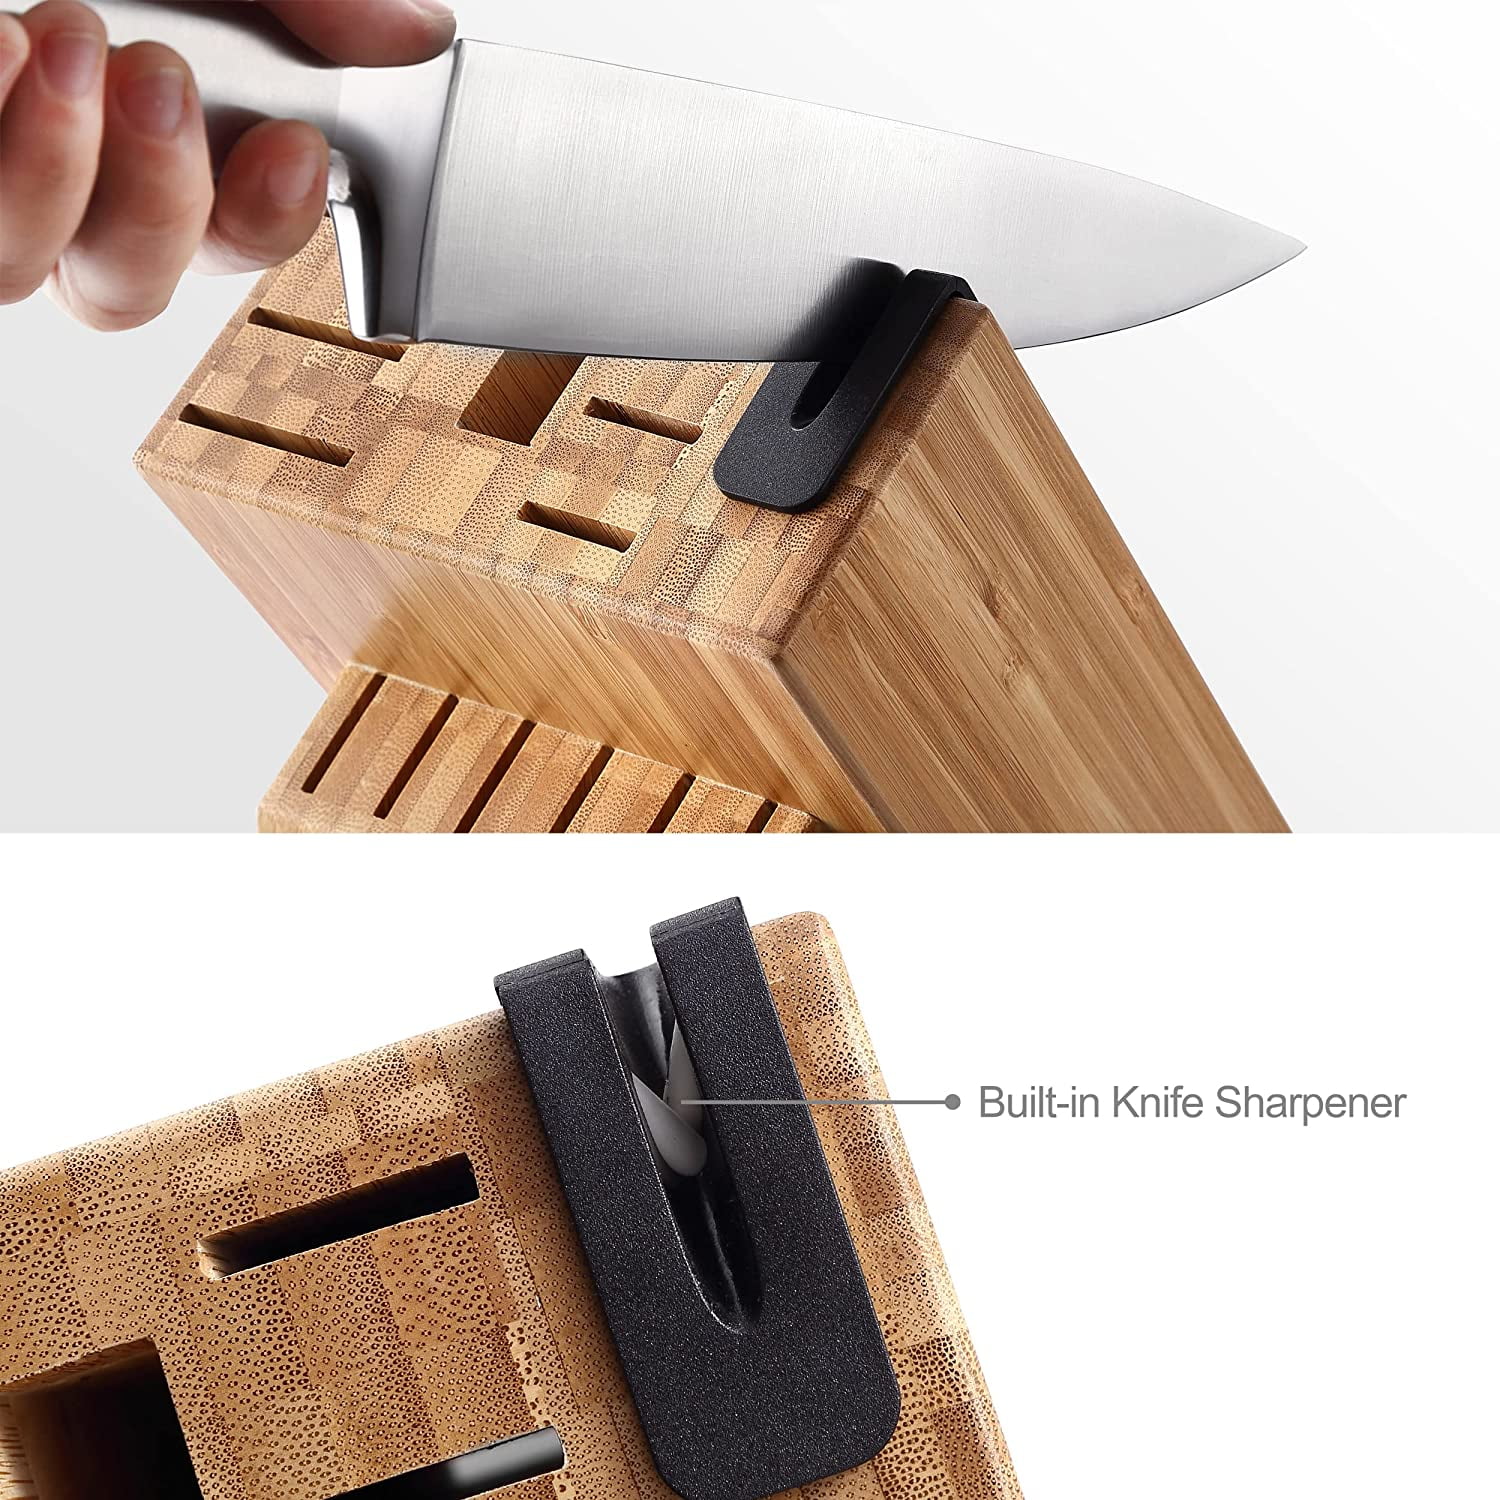 McCook® Knife Sets,Luxury Golden Titanium Kitchen Knife Block Sets with  Built-in Sharpener - Coupon Codes, Promo Codes, Daily Deals, Save Money  Today